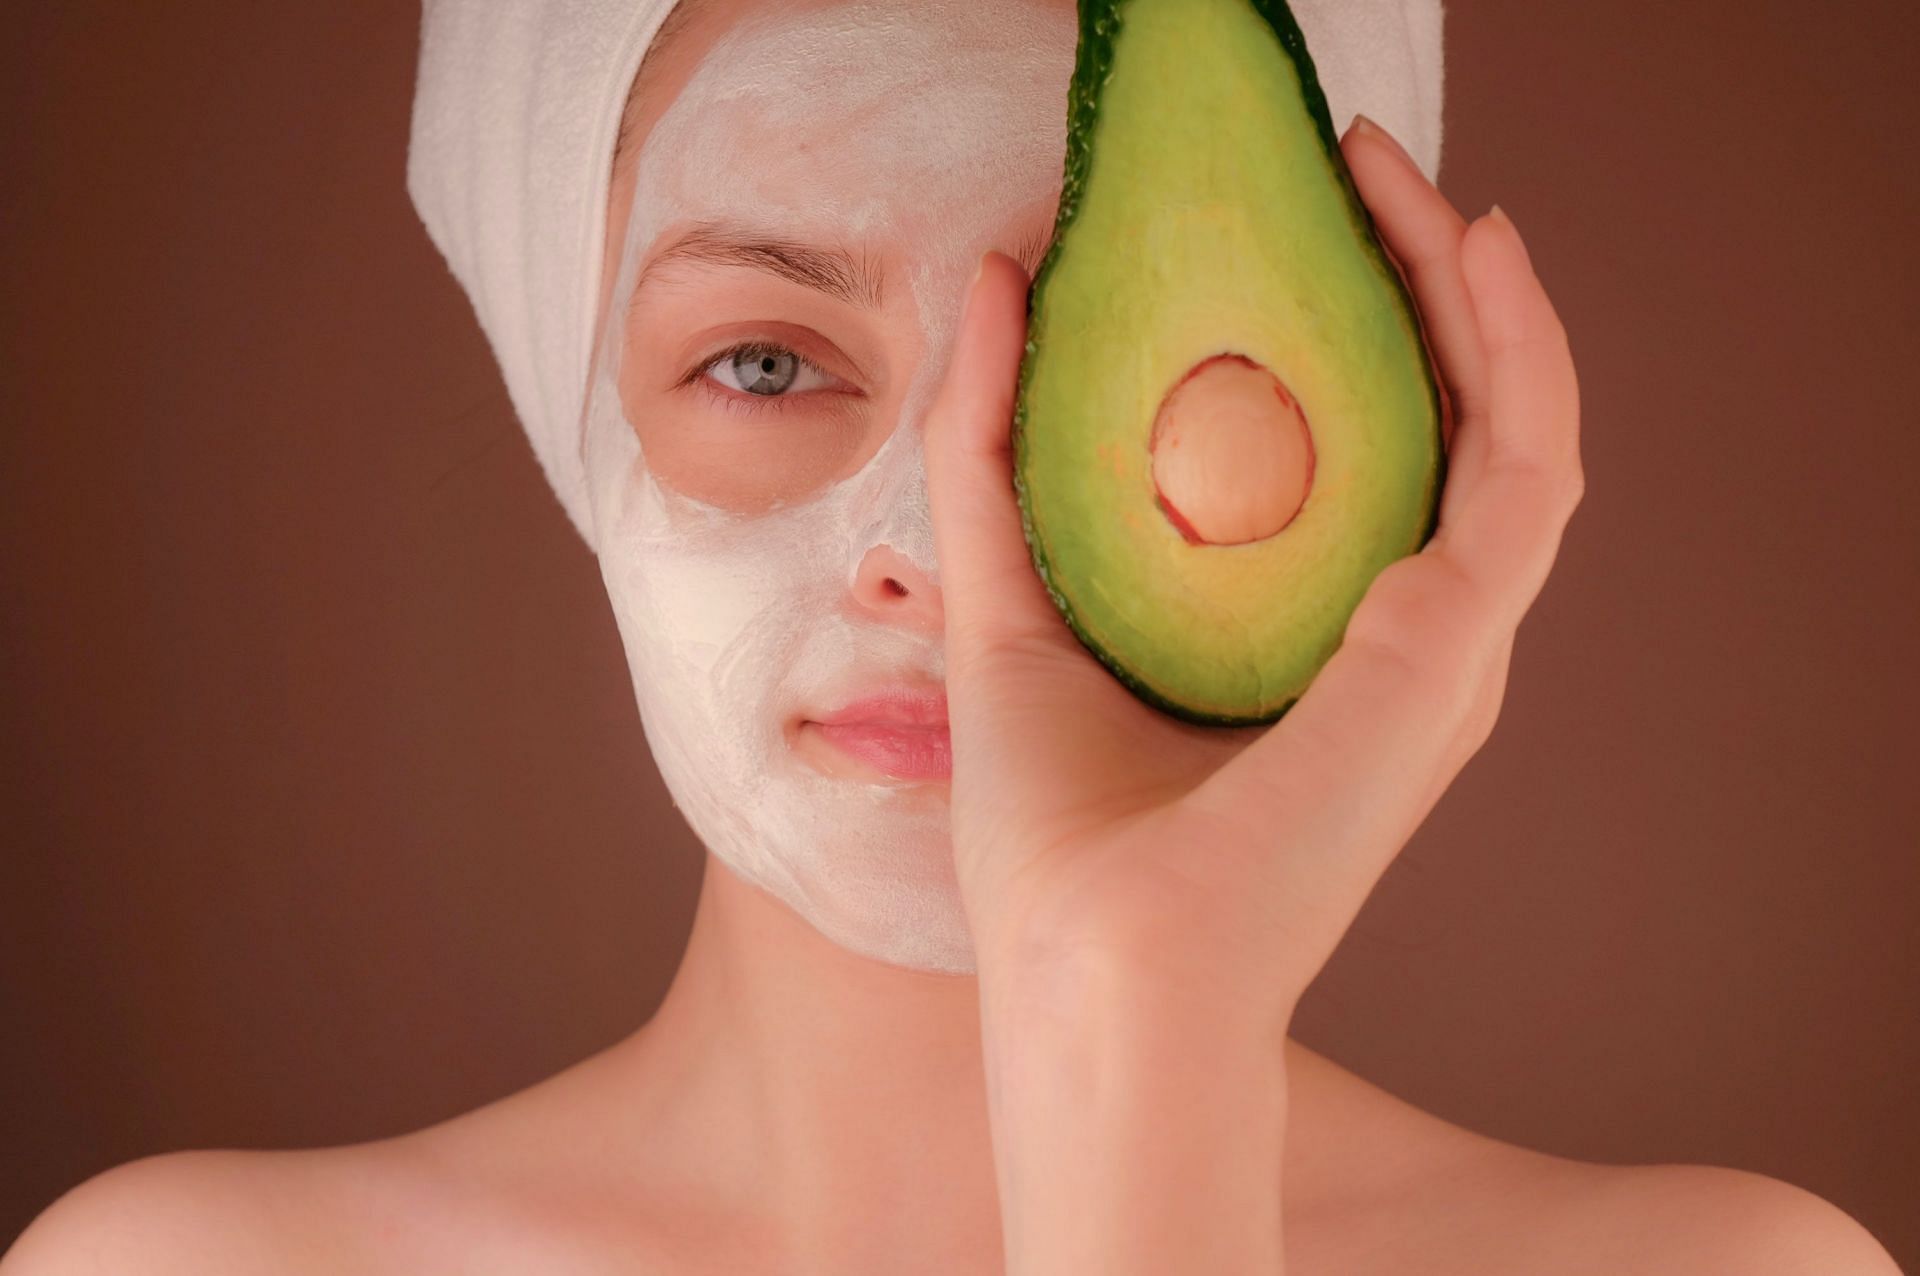 Homemade face masks can assist with acne, breakouts, hyperpigmentation, dryness, and oiliness. (Image via Unsplash/Kimia Zarifi)